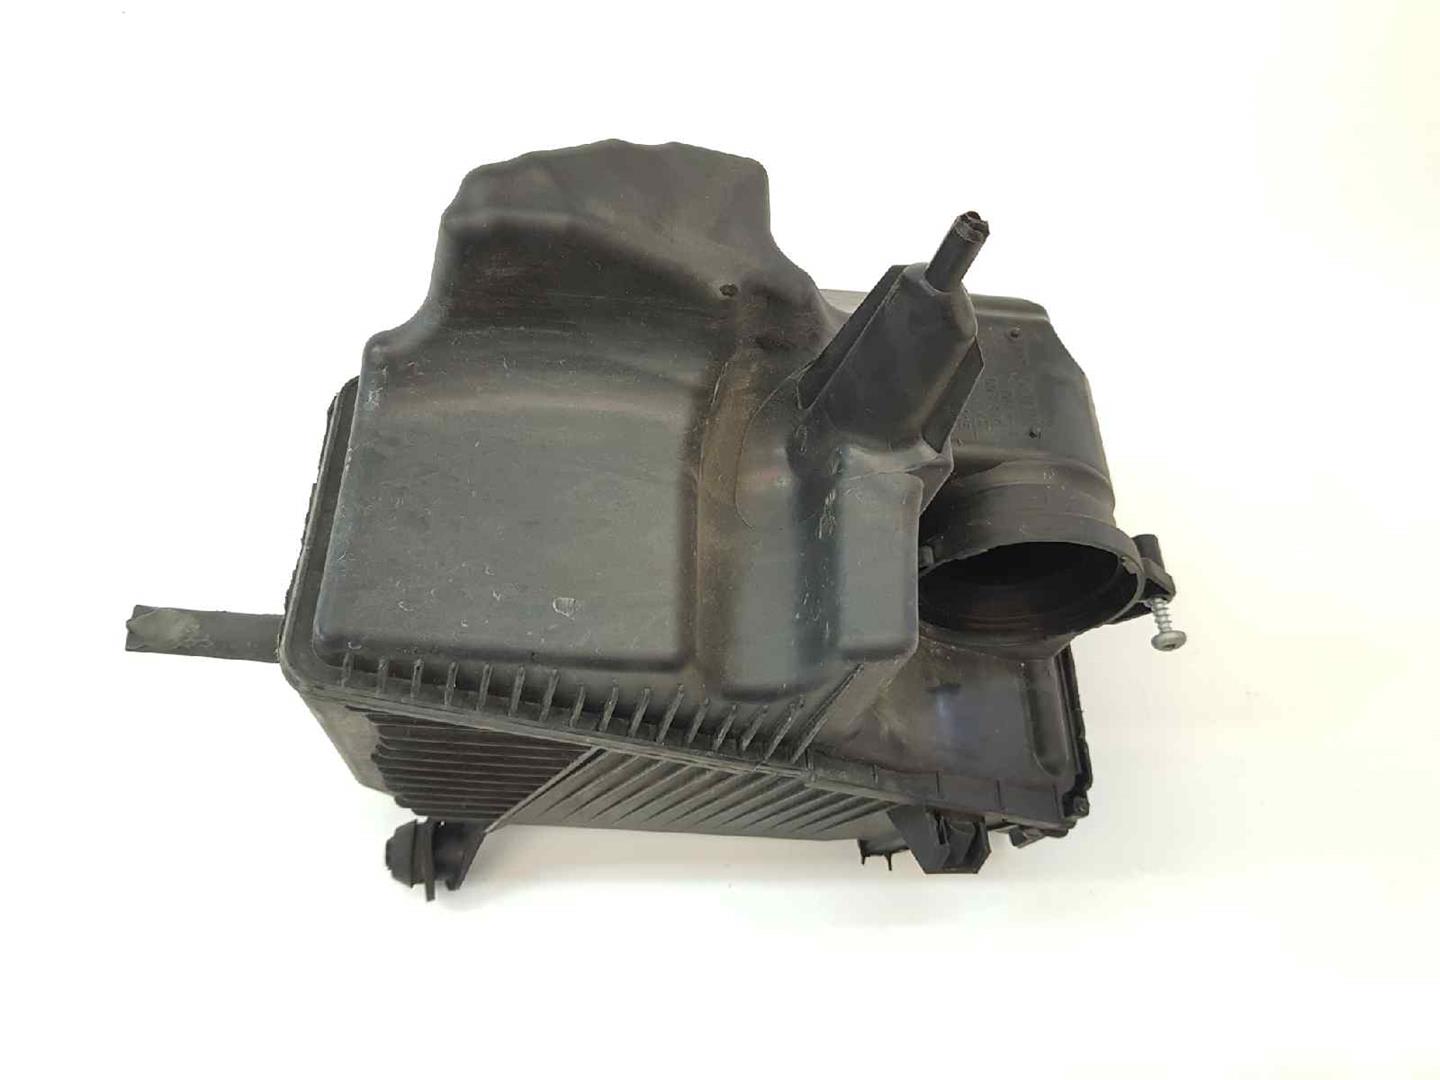 RENAULT Kangoo 2 generation (2007-2021) Other Engine Compartment Parts 8200788196G, H8200808194, 8200788196 19902394